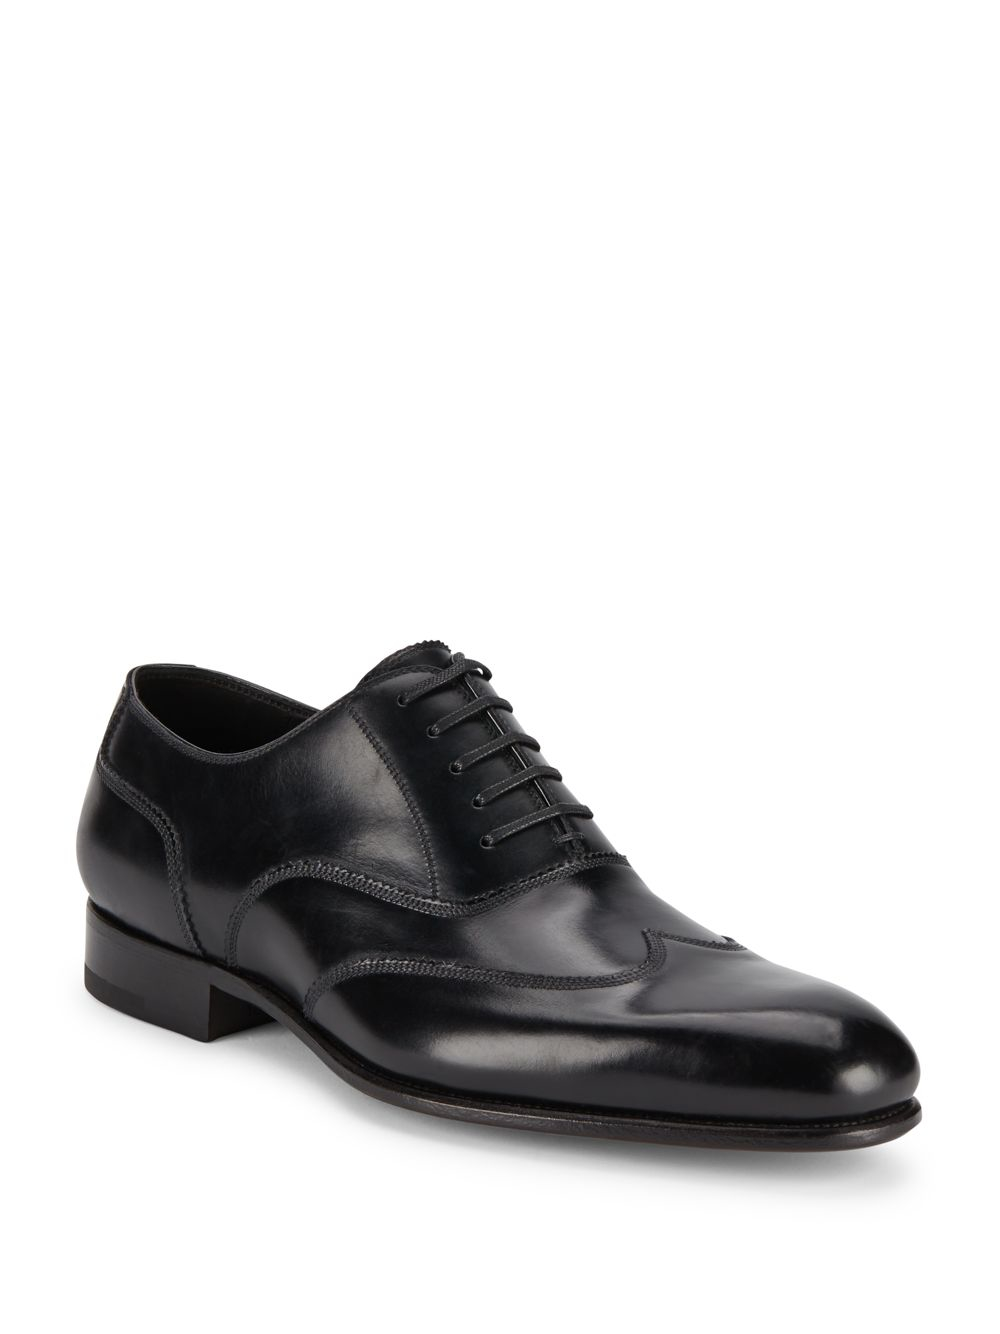 Tom Ford Italian Leather Wingtip Dress Shoes in Black for Men | Lyst